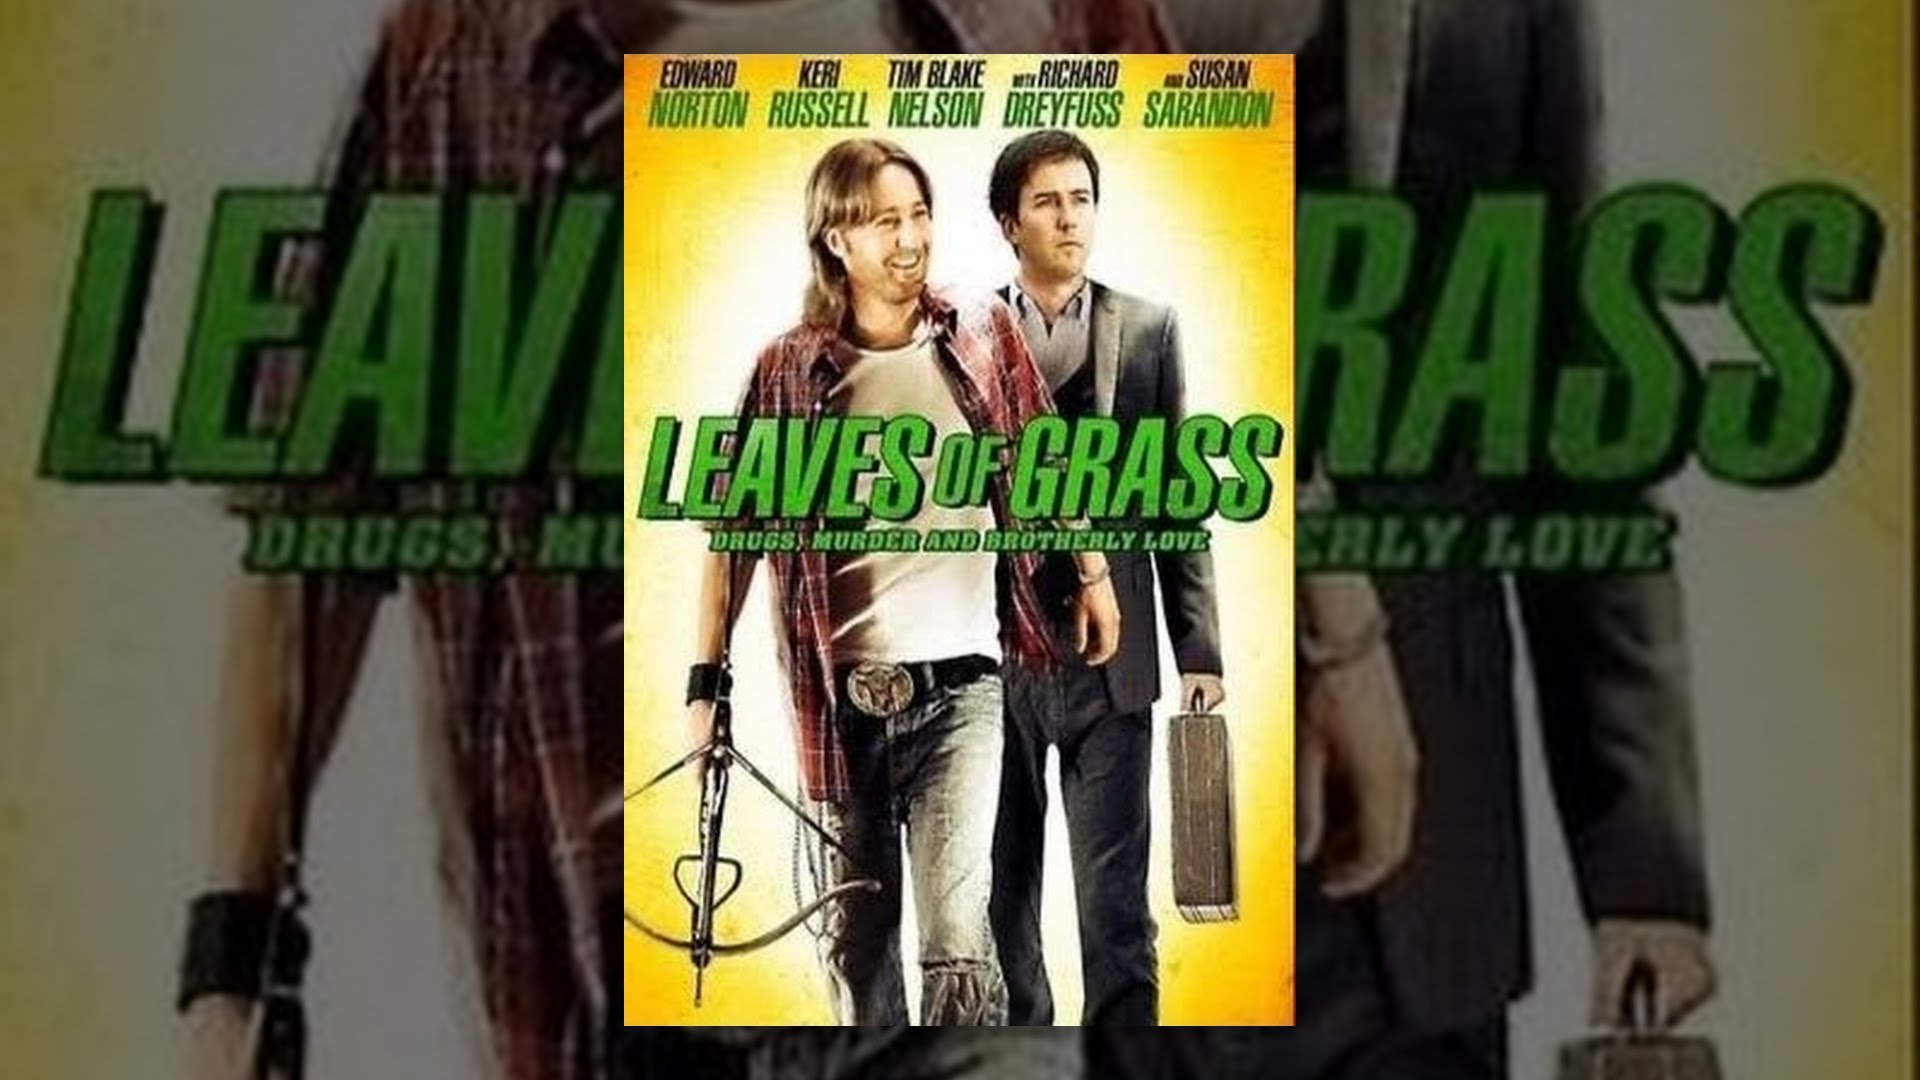 45 HQ Pictures Leaves Of Grass Movie Trailer : Leaves of Grass (film) - Alchetron, The Free Social ...